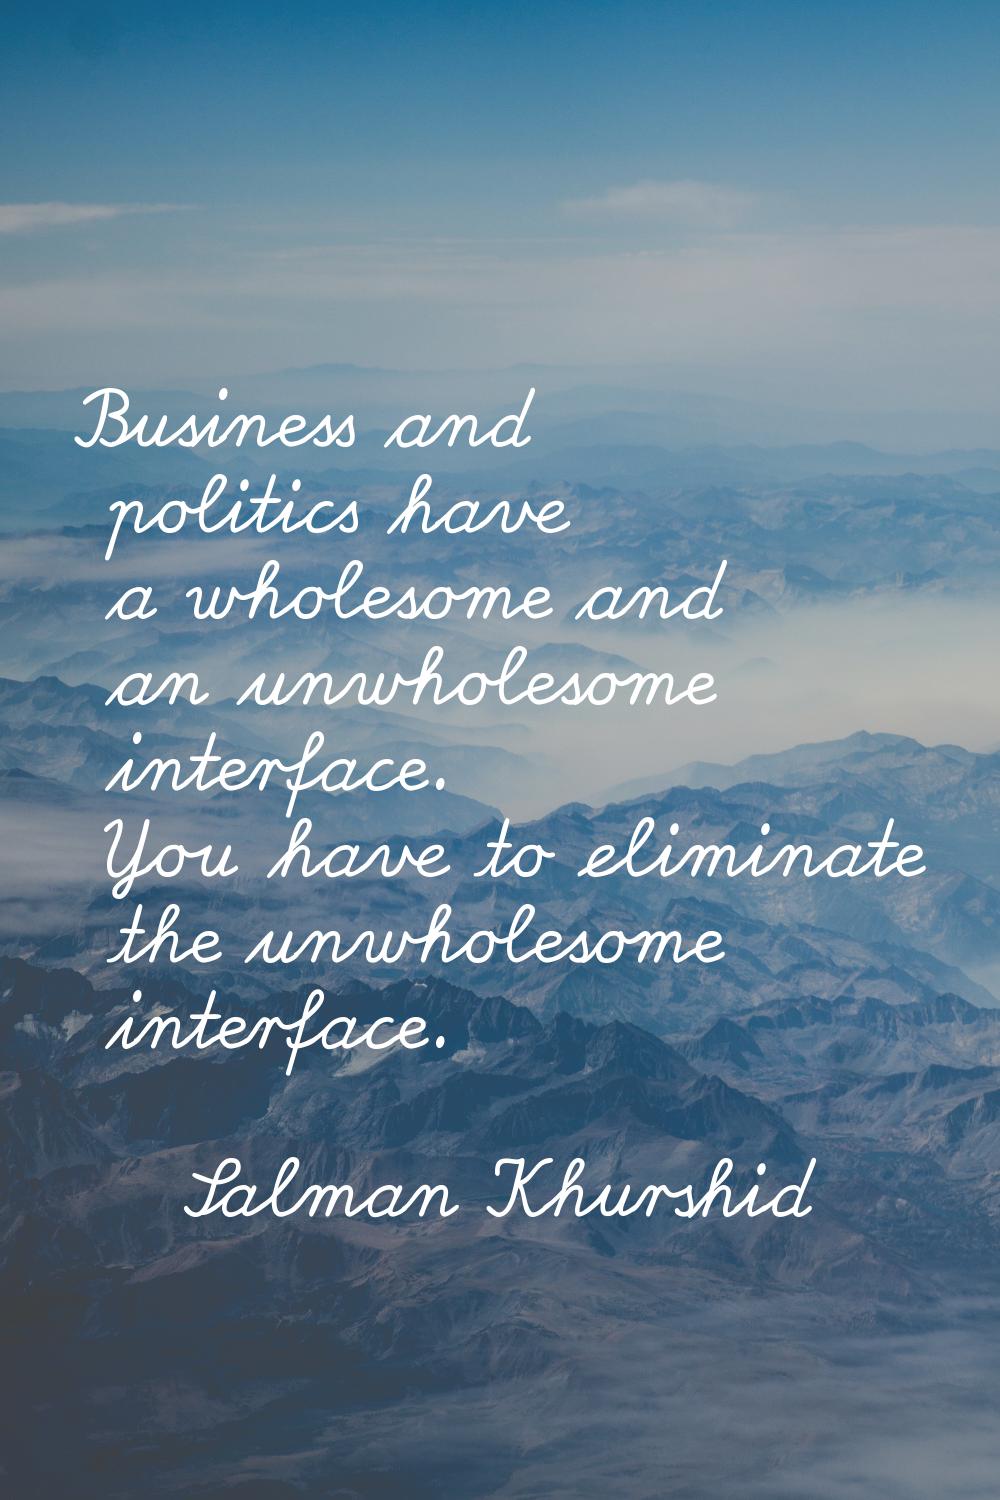 Business and politics have a wholesome and an unwholesome interface. You have to eliminate the unwh